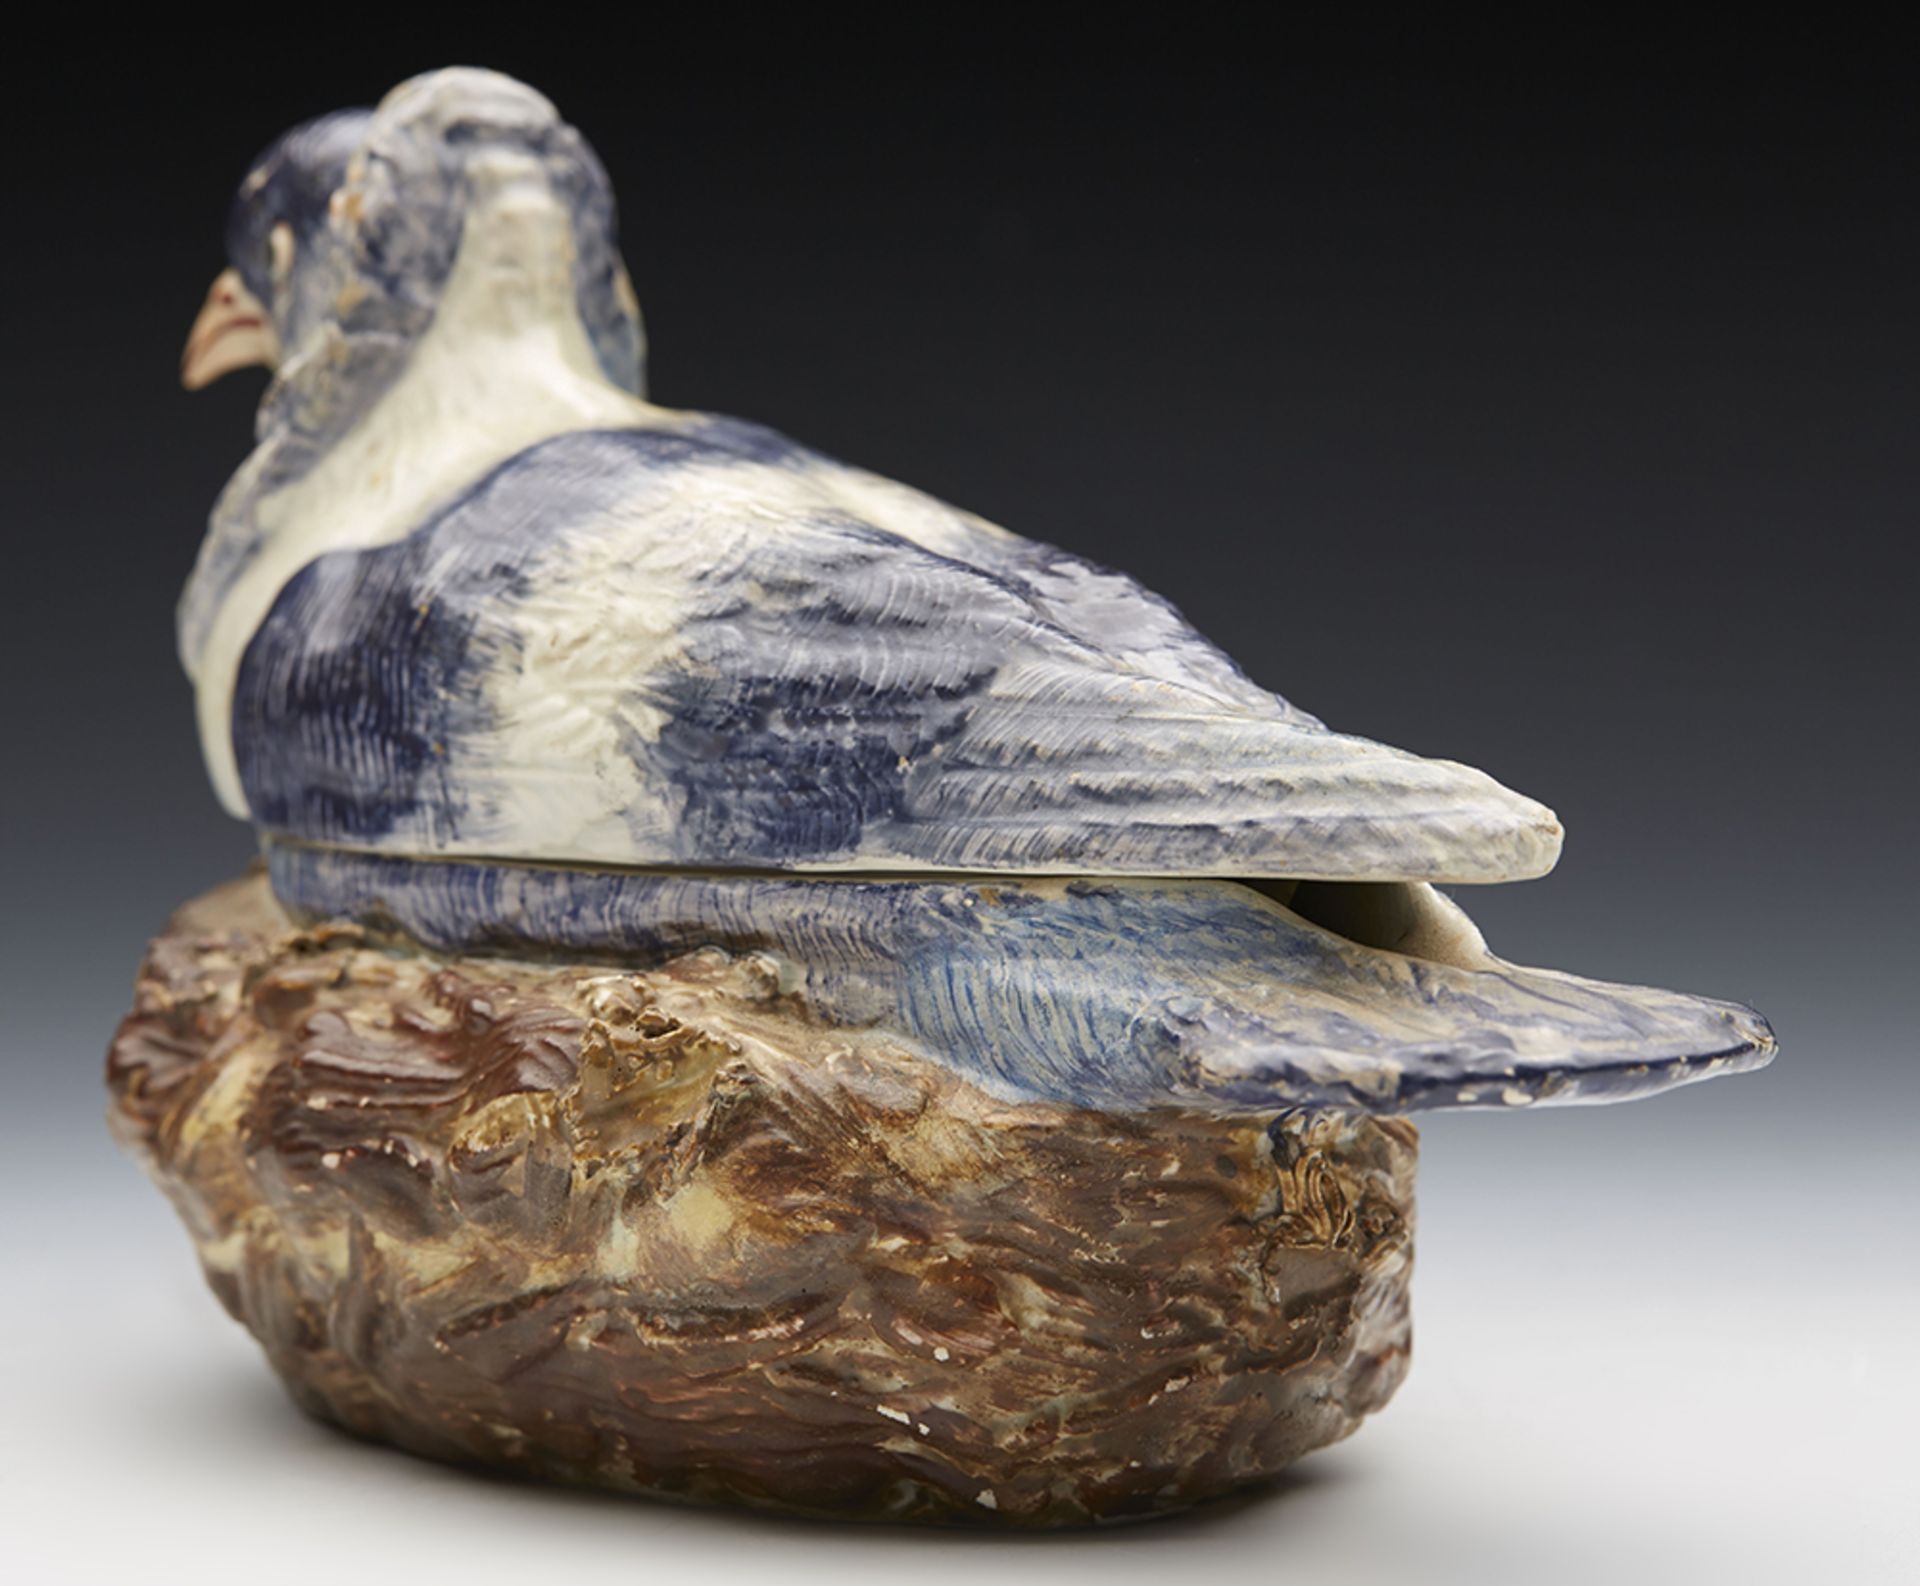 Antique Staffordshire Pearlware Pigeon On Nest Tureen Early 19Th C. - Image 8 of 8